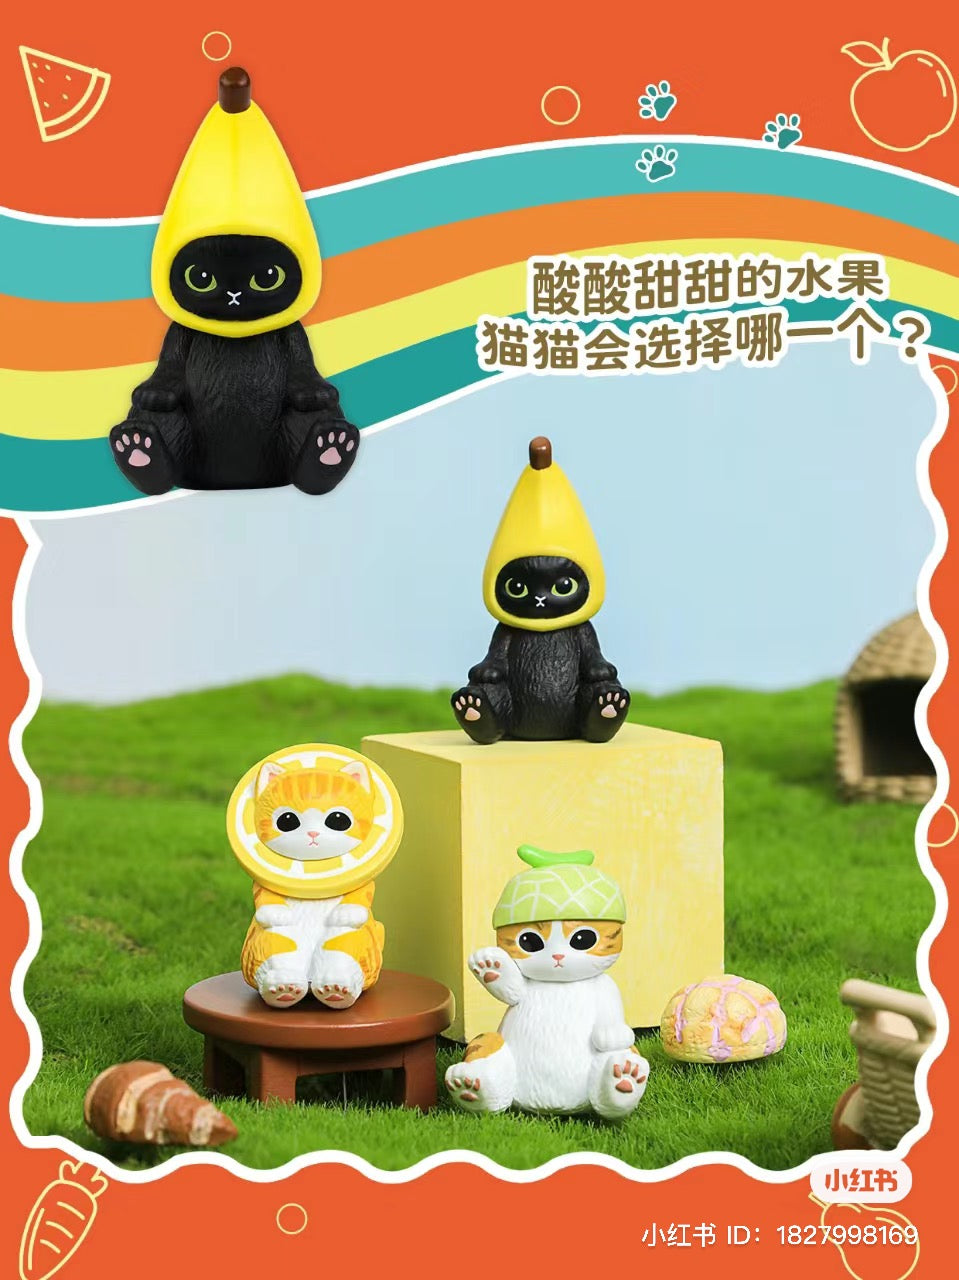 A group of cute blind bag toys from the Mofusand Cute Series 2 - Preorder by Strangecat Toys. Each bag contains 4 designs. 10 bags per case.